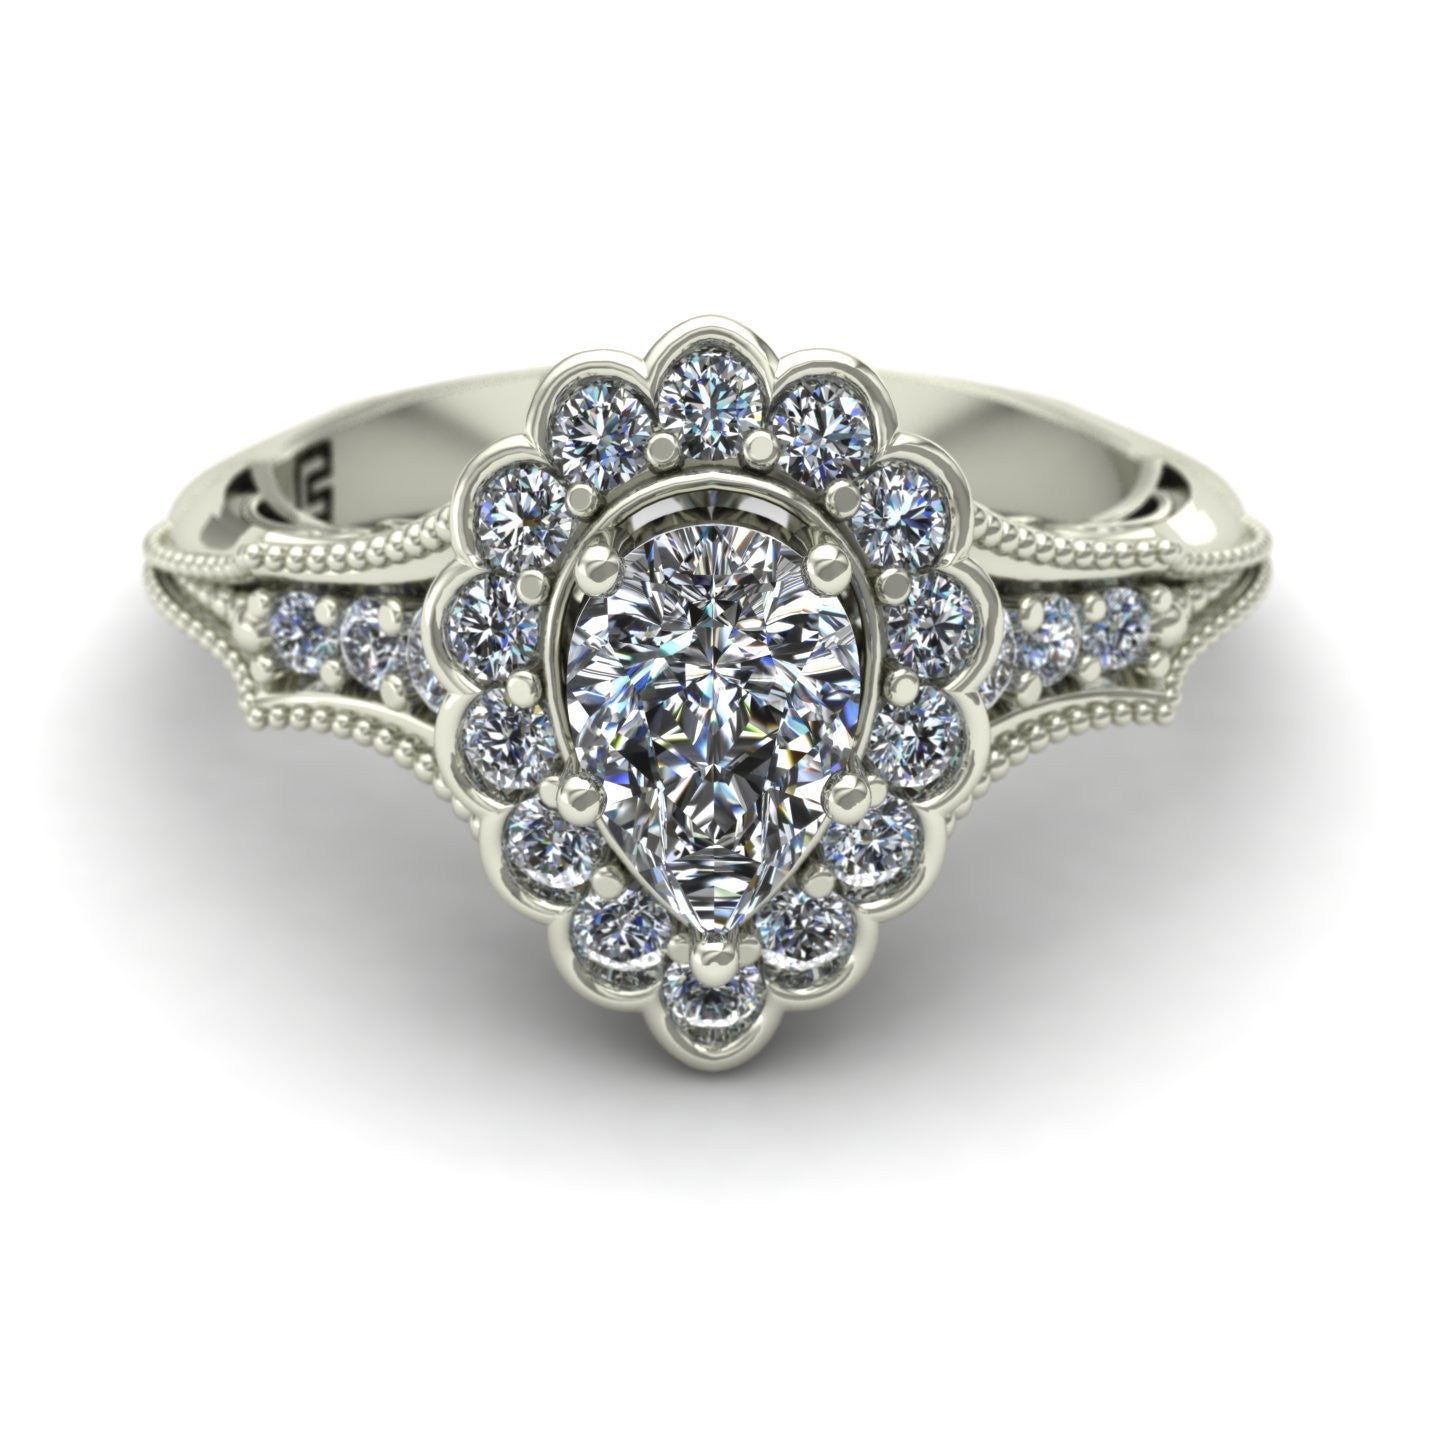 three quarter carat pear cut diamond engagement ring with scallop halo in 18k white gold - Charles Babb Designs - top view